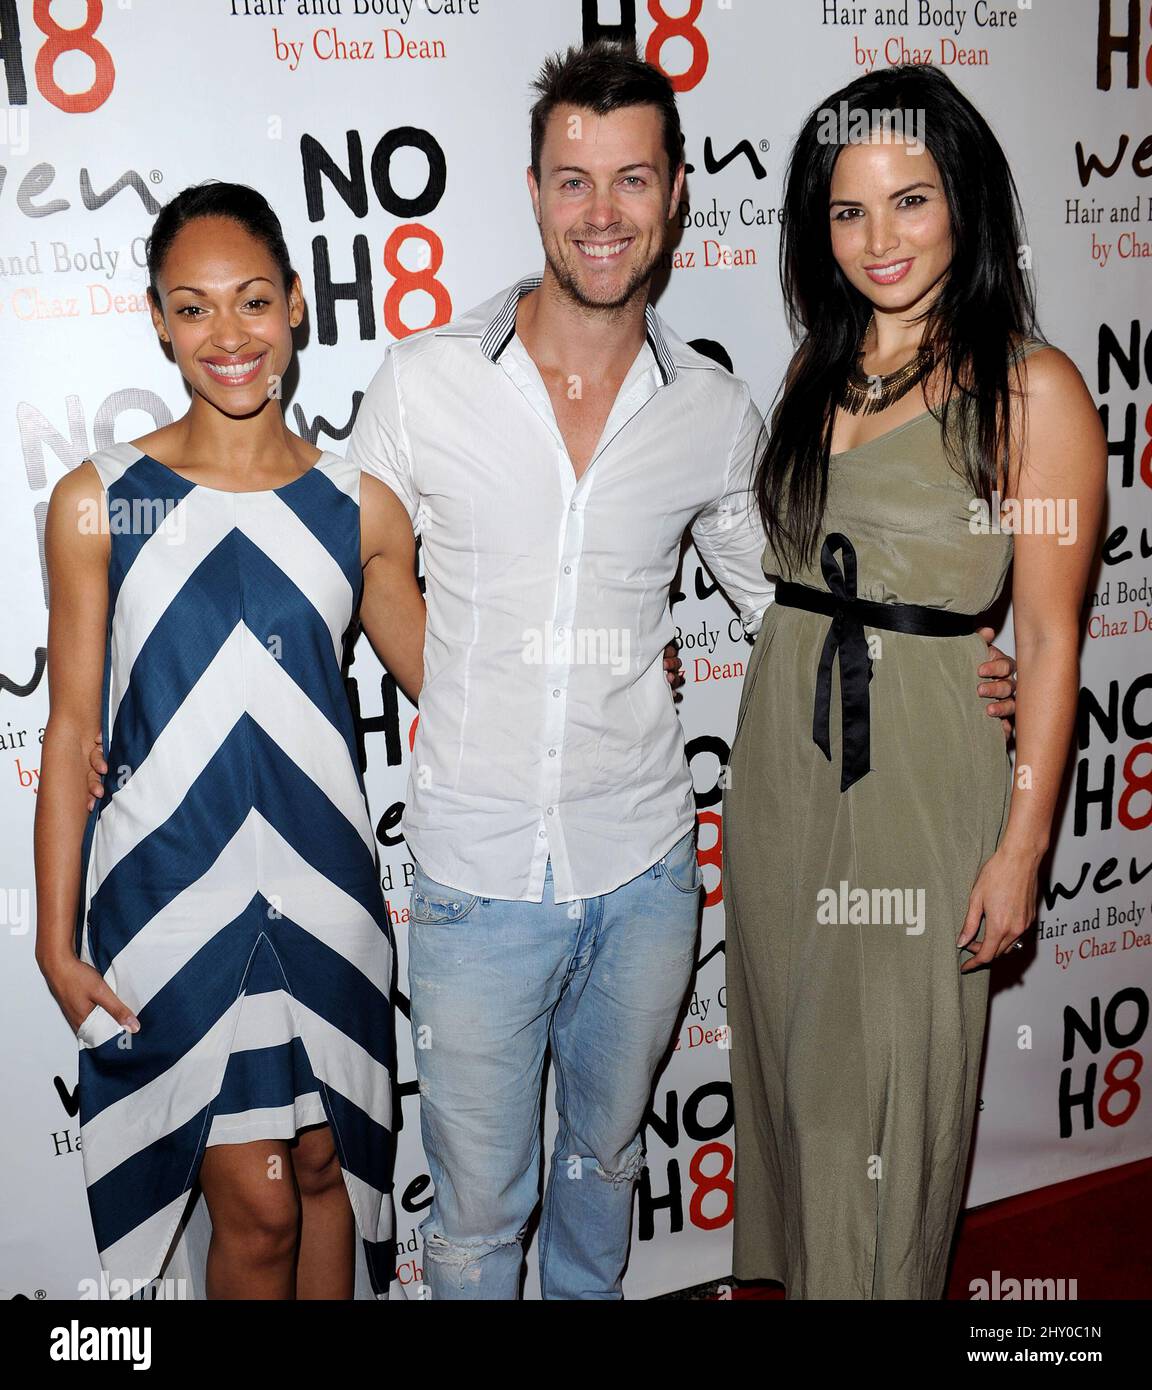 Lesley-Ann Brandt, Katrina Law and Daniel Feuerriegel attending the 212 NOH8 Campaign anniversary party in Los Angeles, California. Stock Photo